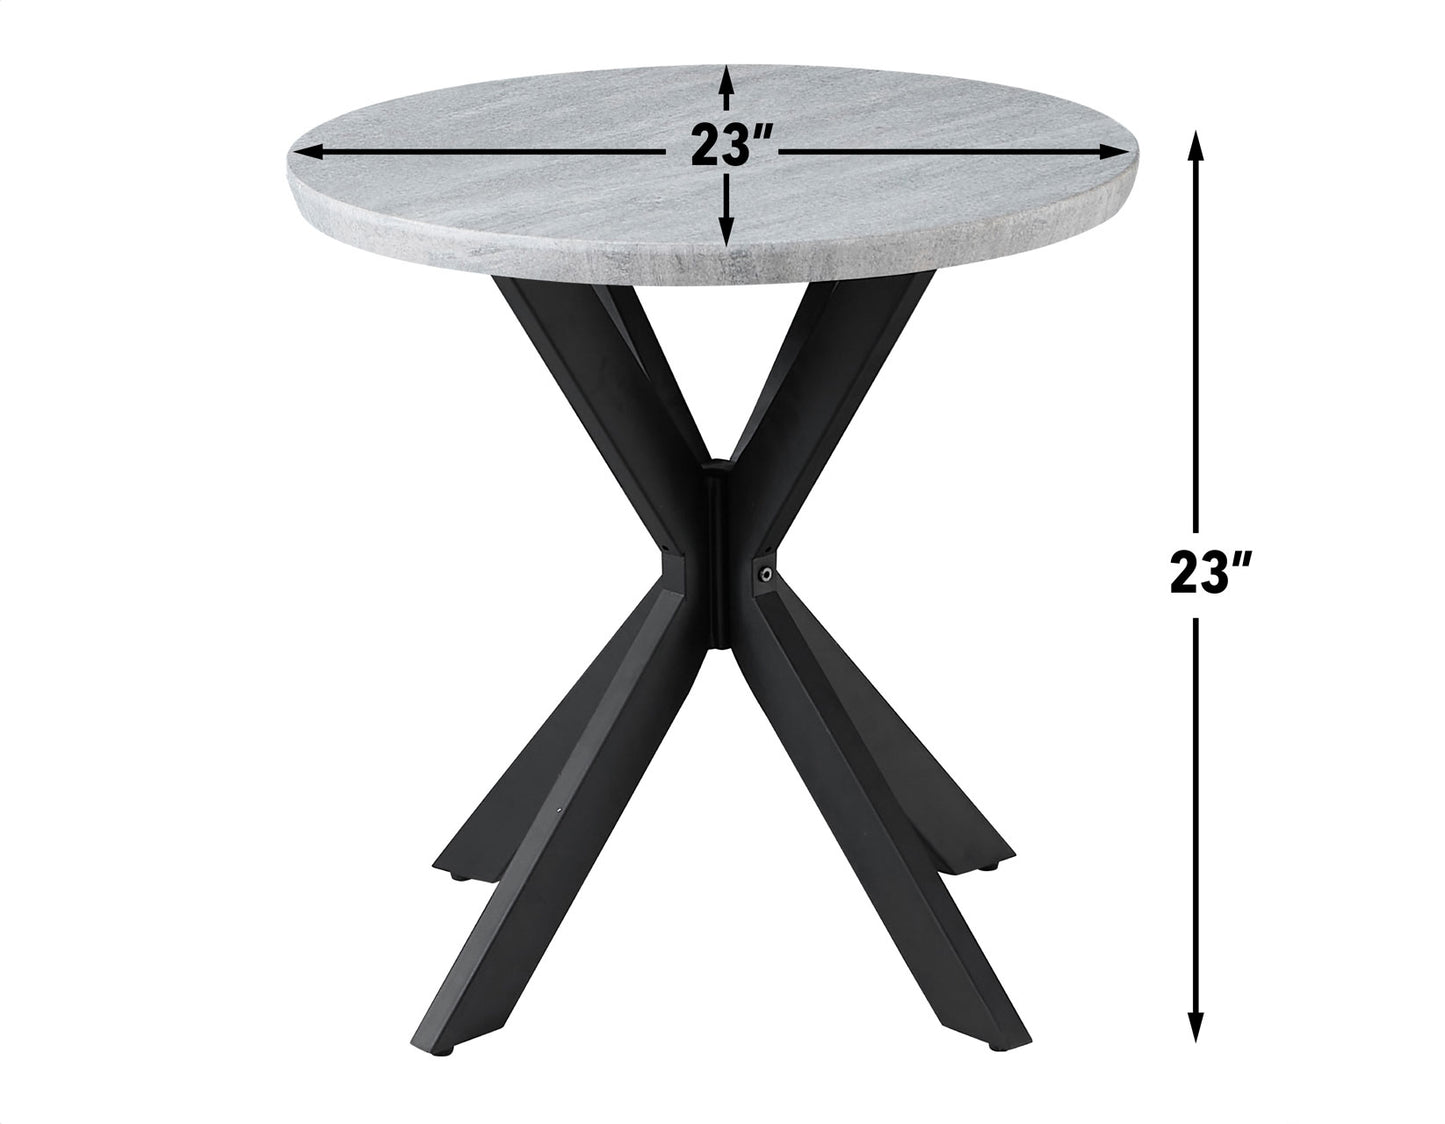 Keyla Faux-Marble Round End Table